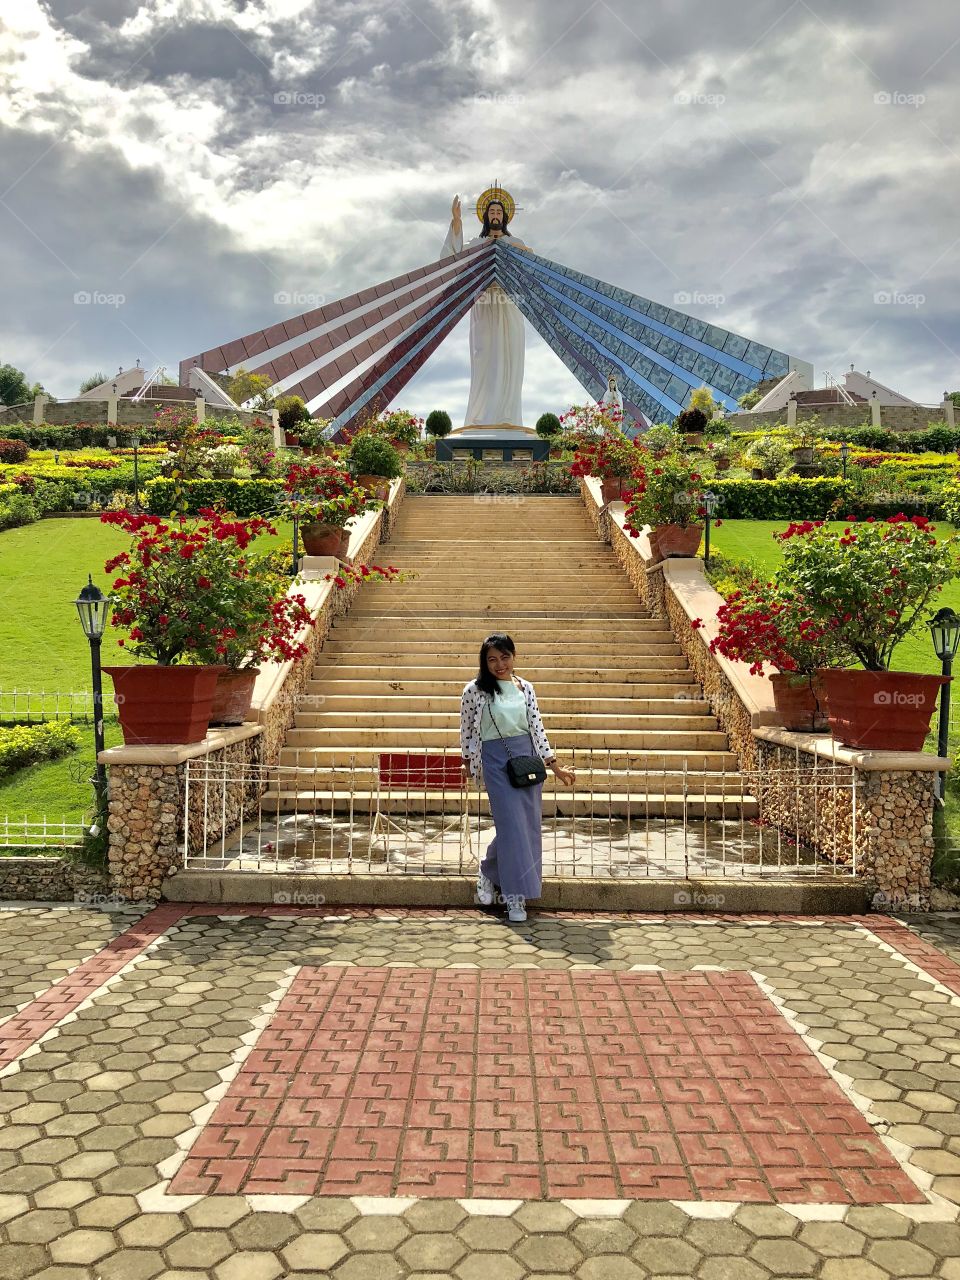 Divine Mercy Chapel and the beautiful place.